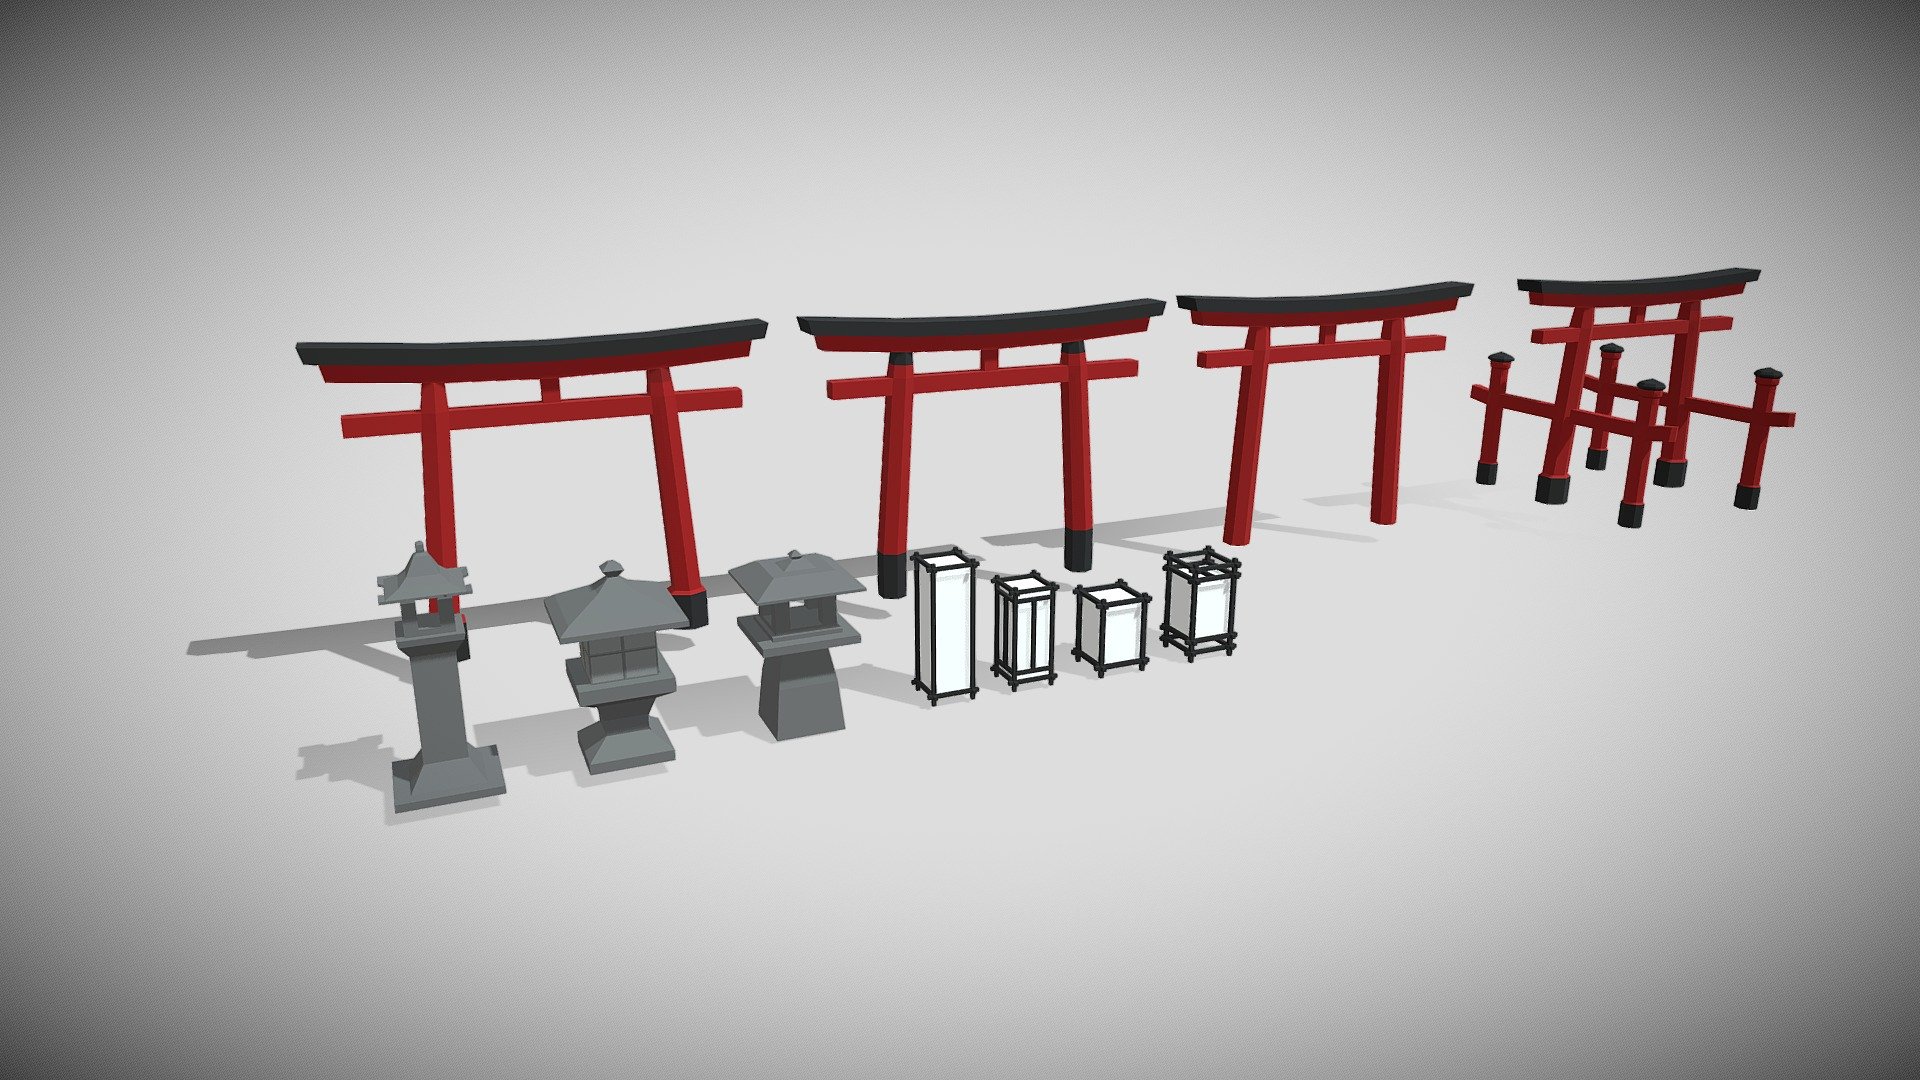 Low Poly Japan 1 pack

Free to use

Made with blender

Update 13-12-2020:
* Fixed lamp normals

Social Info: 
Portfolio
Twitter
LinkedIn
Sketchfab
Youbube
ArtStation
Instagram
GitHub - Low Poly Japan 1 - Download Free 3D model by Marcel van Duijn (@MarcelvanDuijn) 3d model